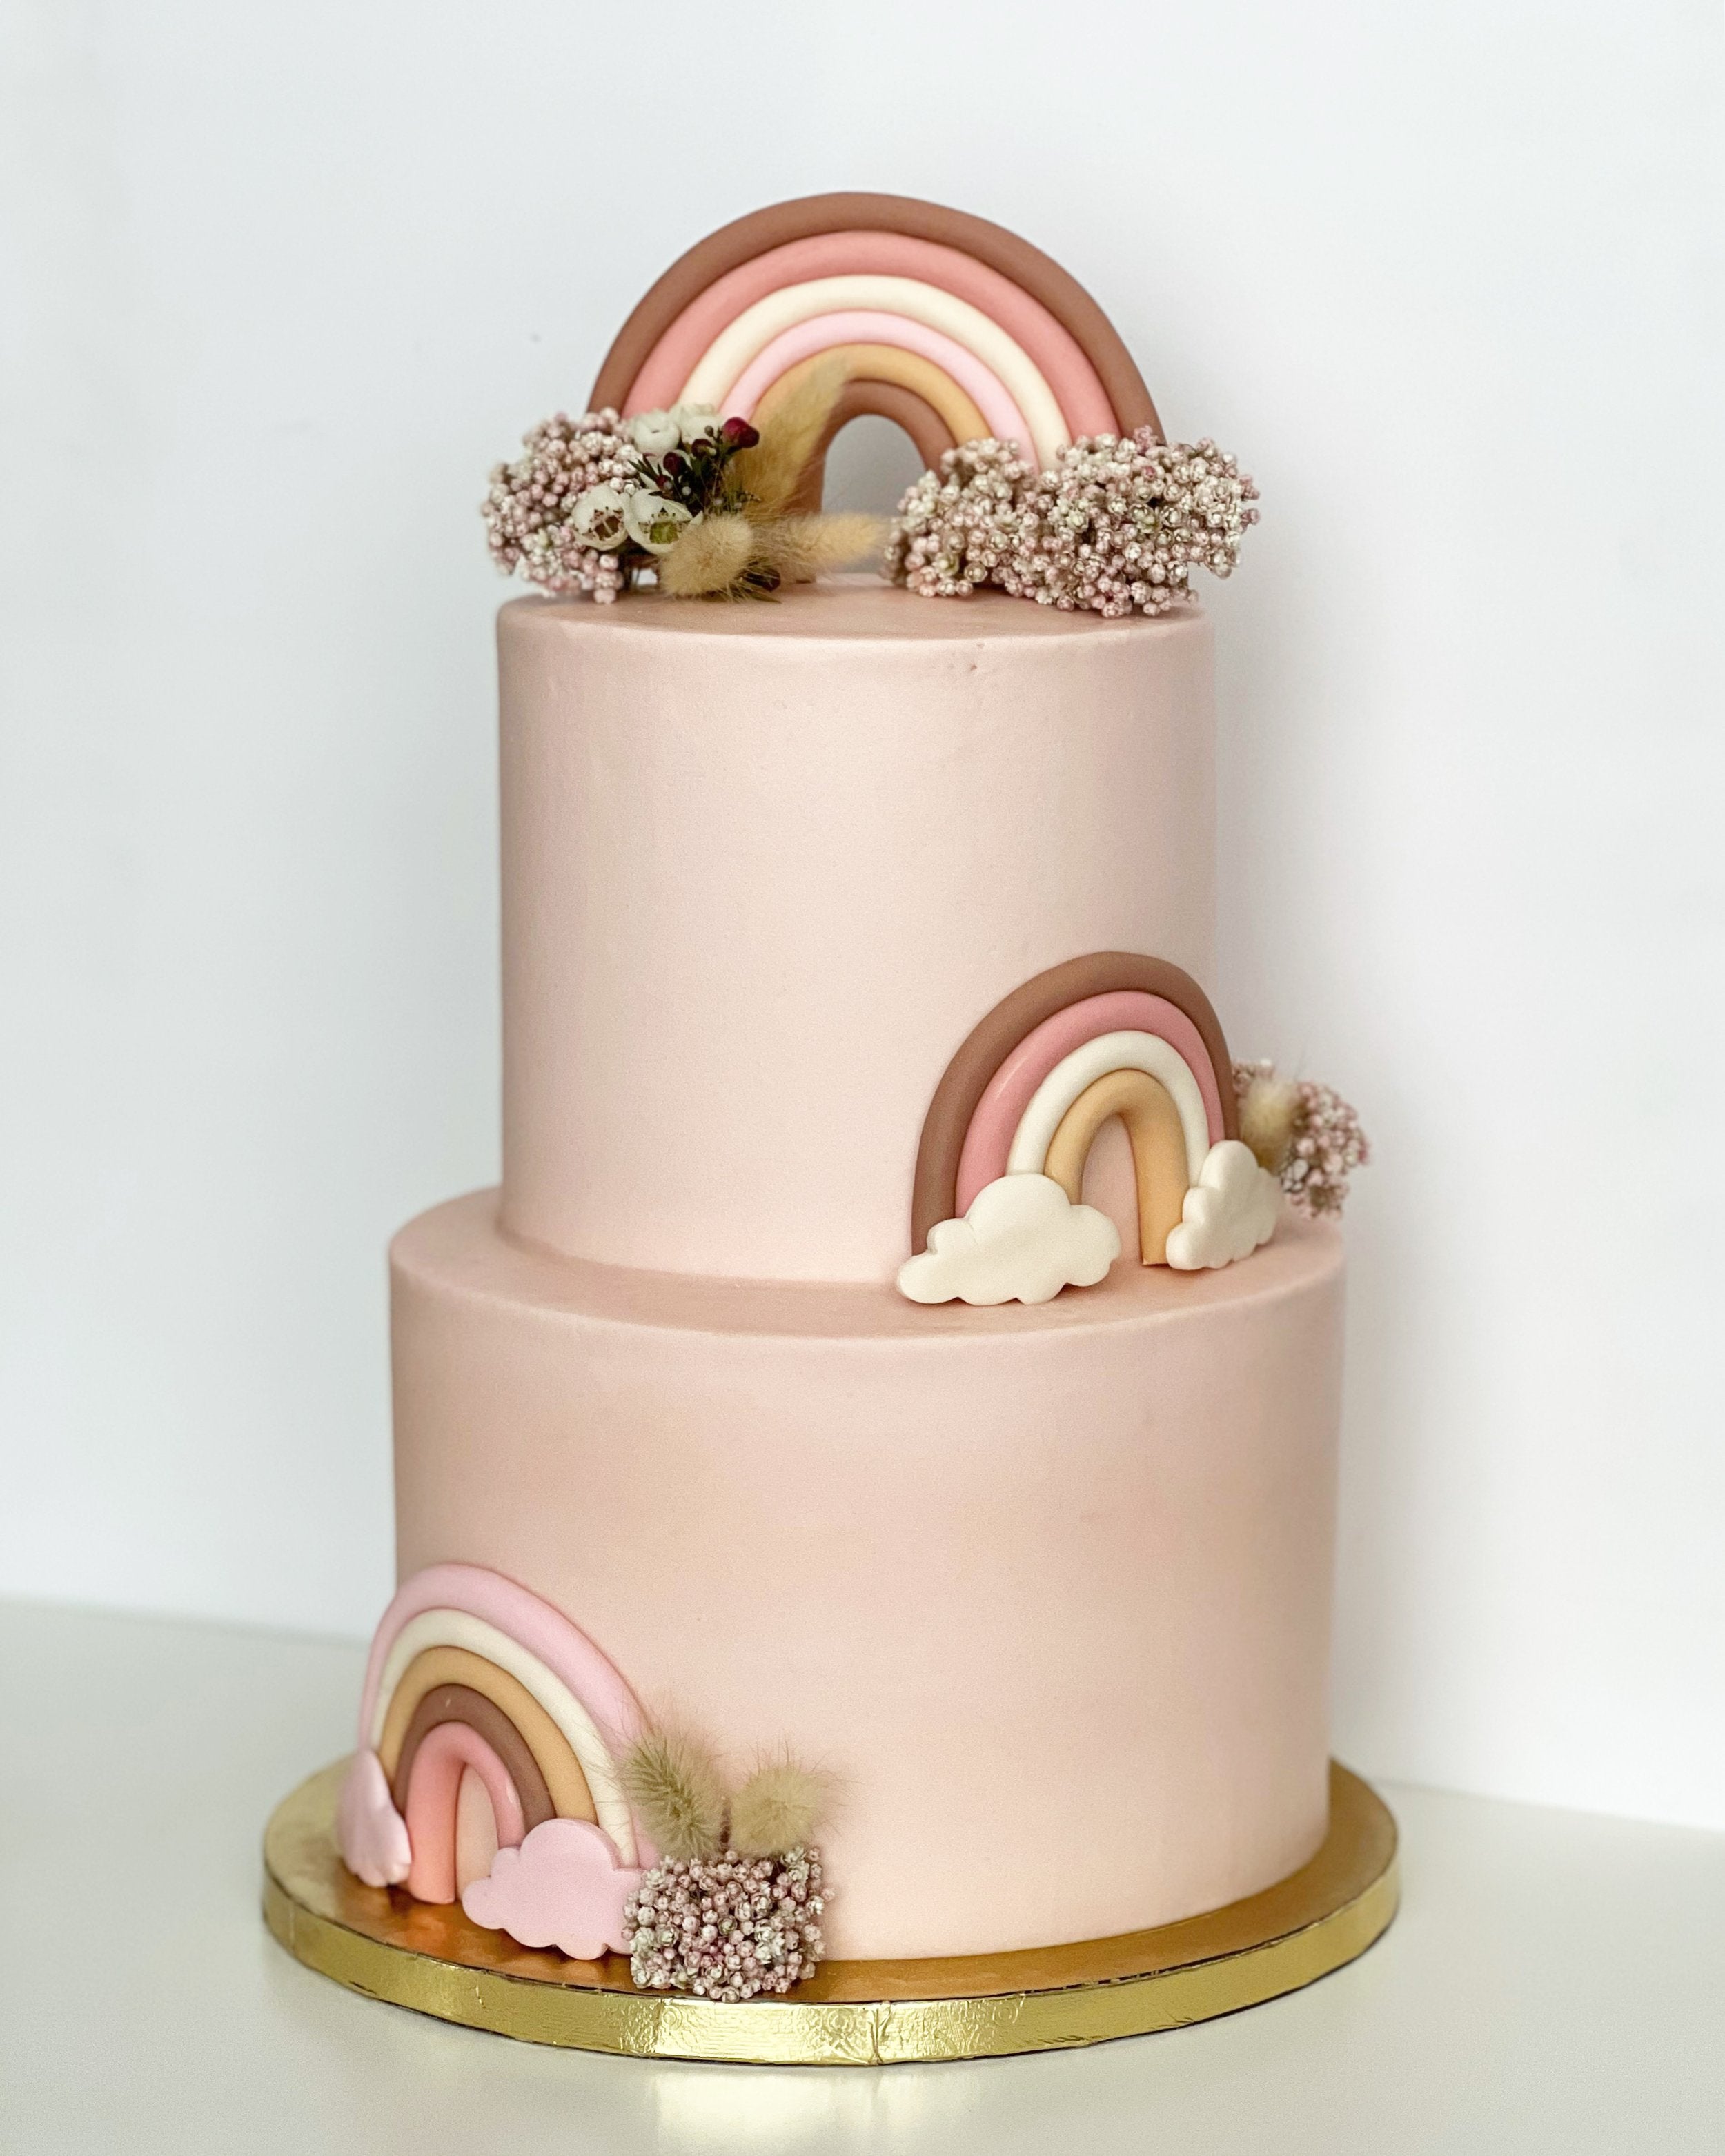 15 places for unicorns to get your RAINBOW CAKE FIX - Explodingbelly